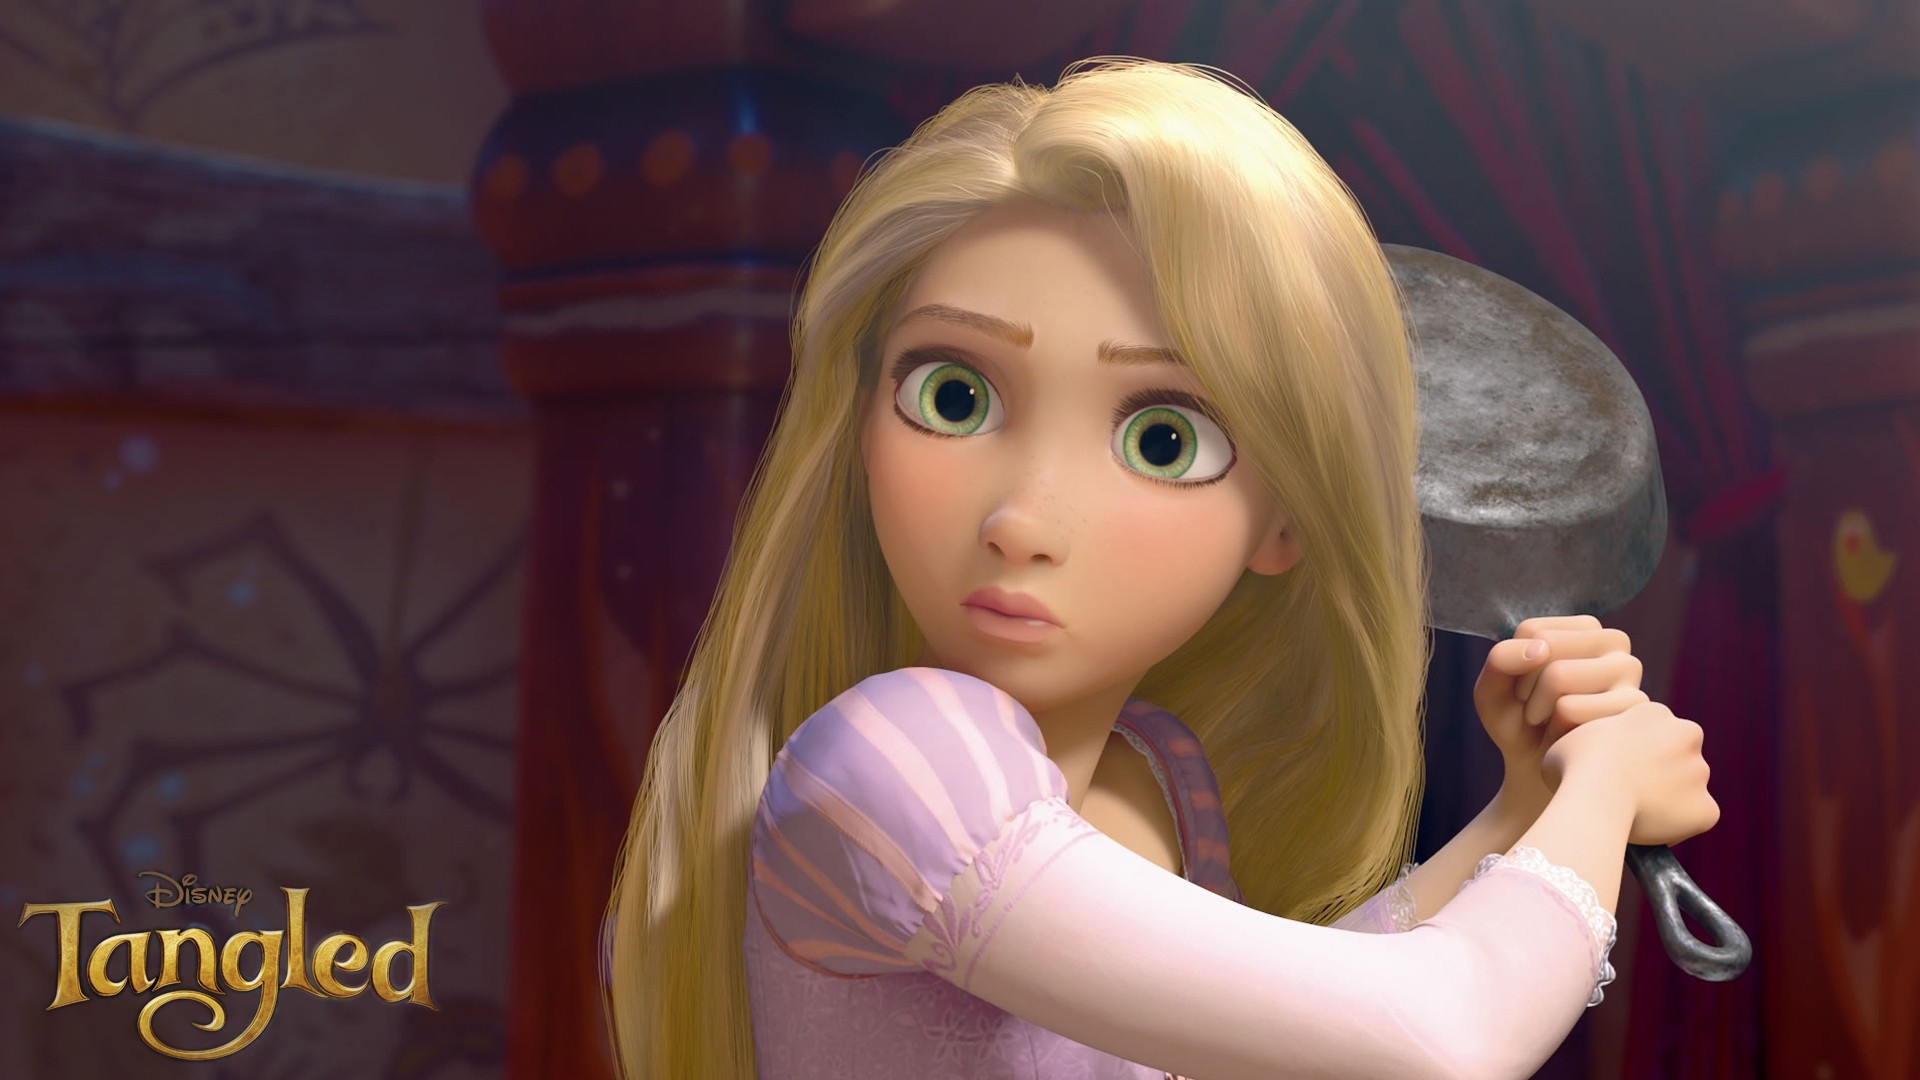 1920x1080 movies, Tangled, Disney, Rapunzel Wallpapers HD / Desktop and Mobile Backgrounds